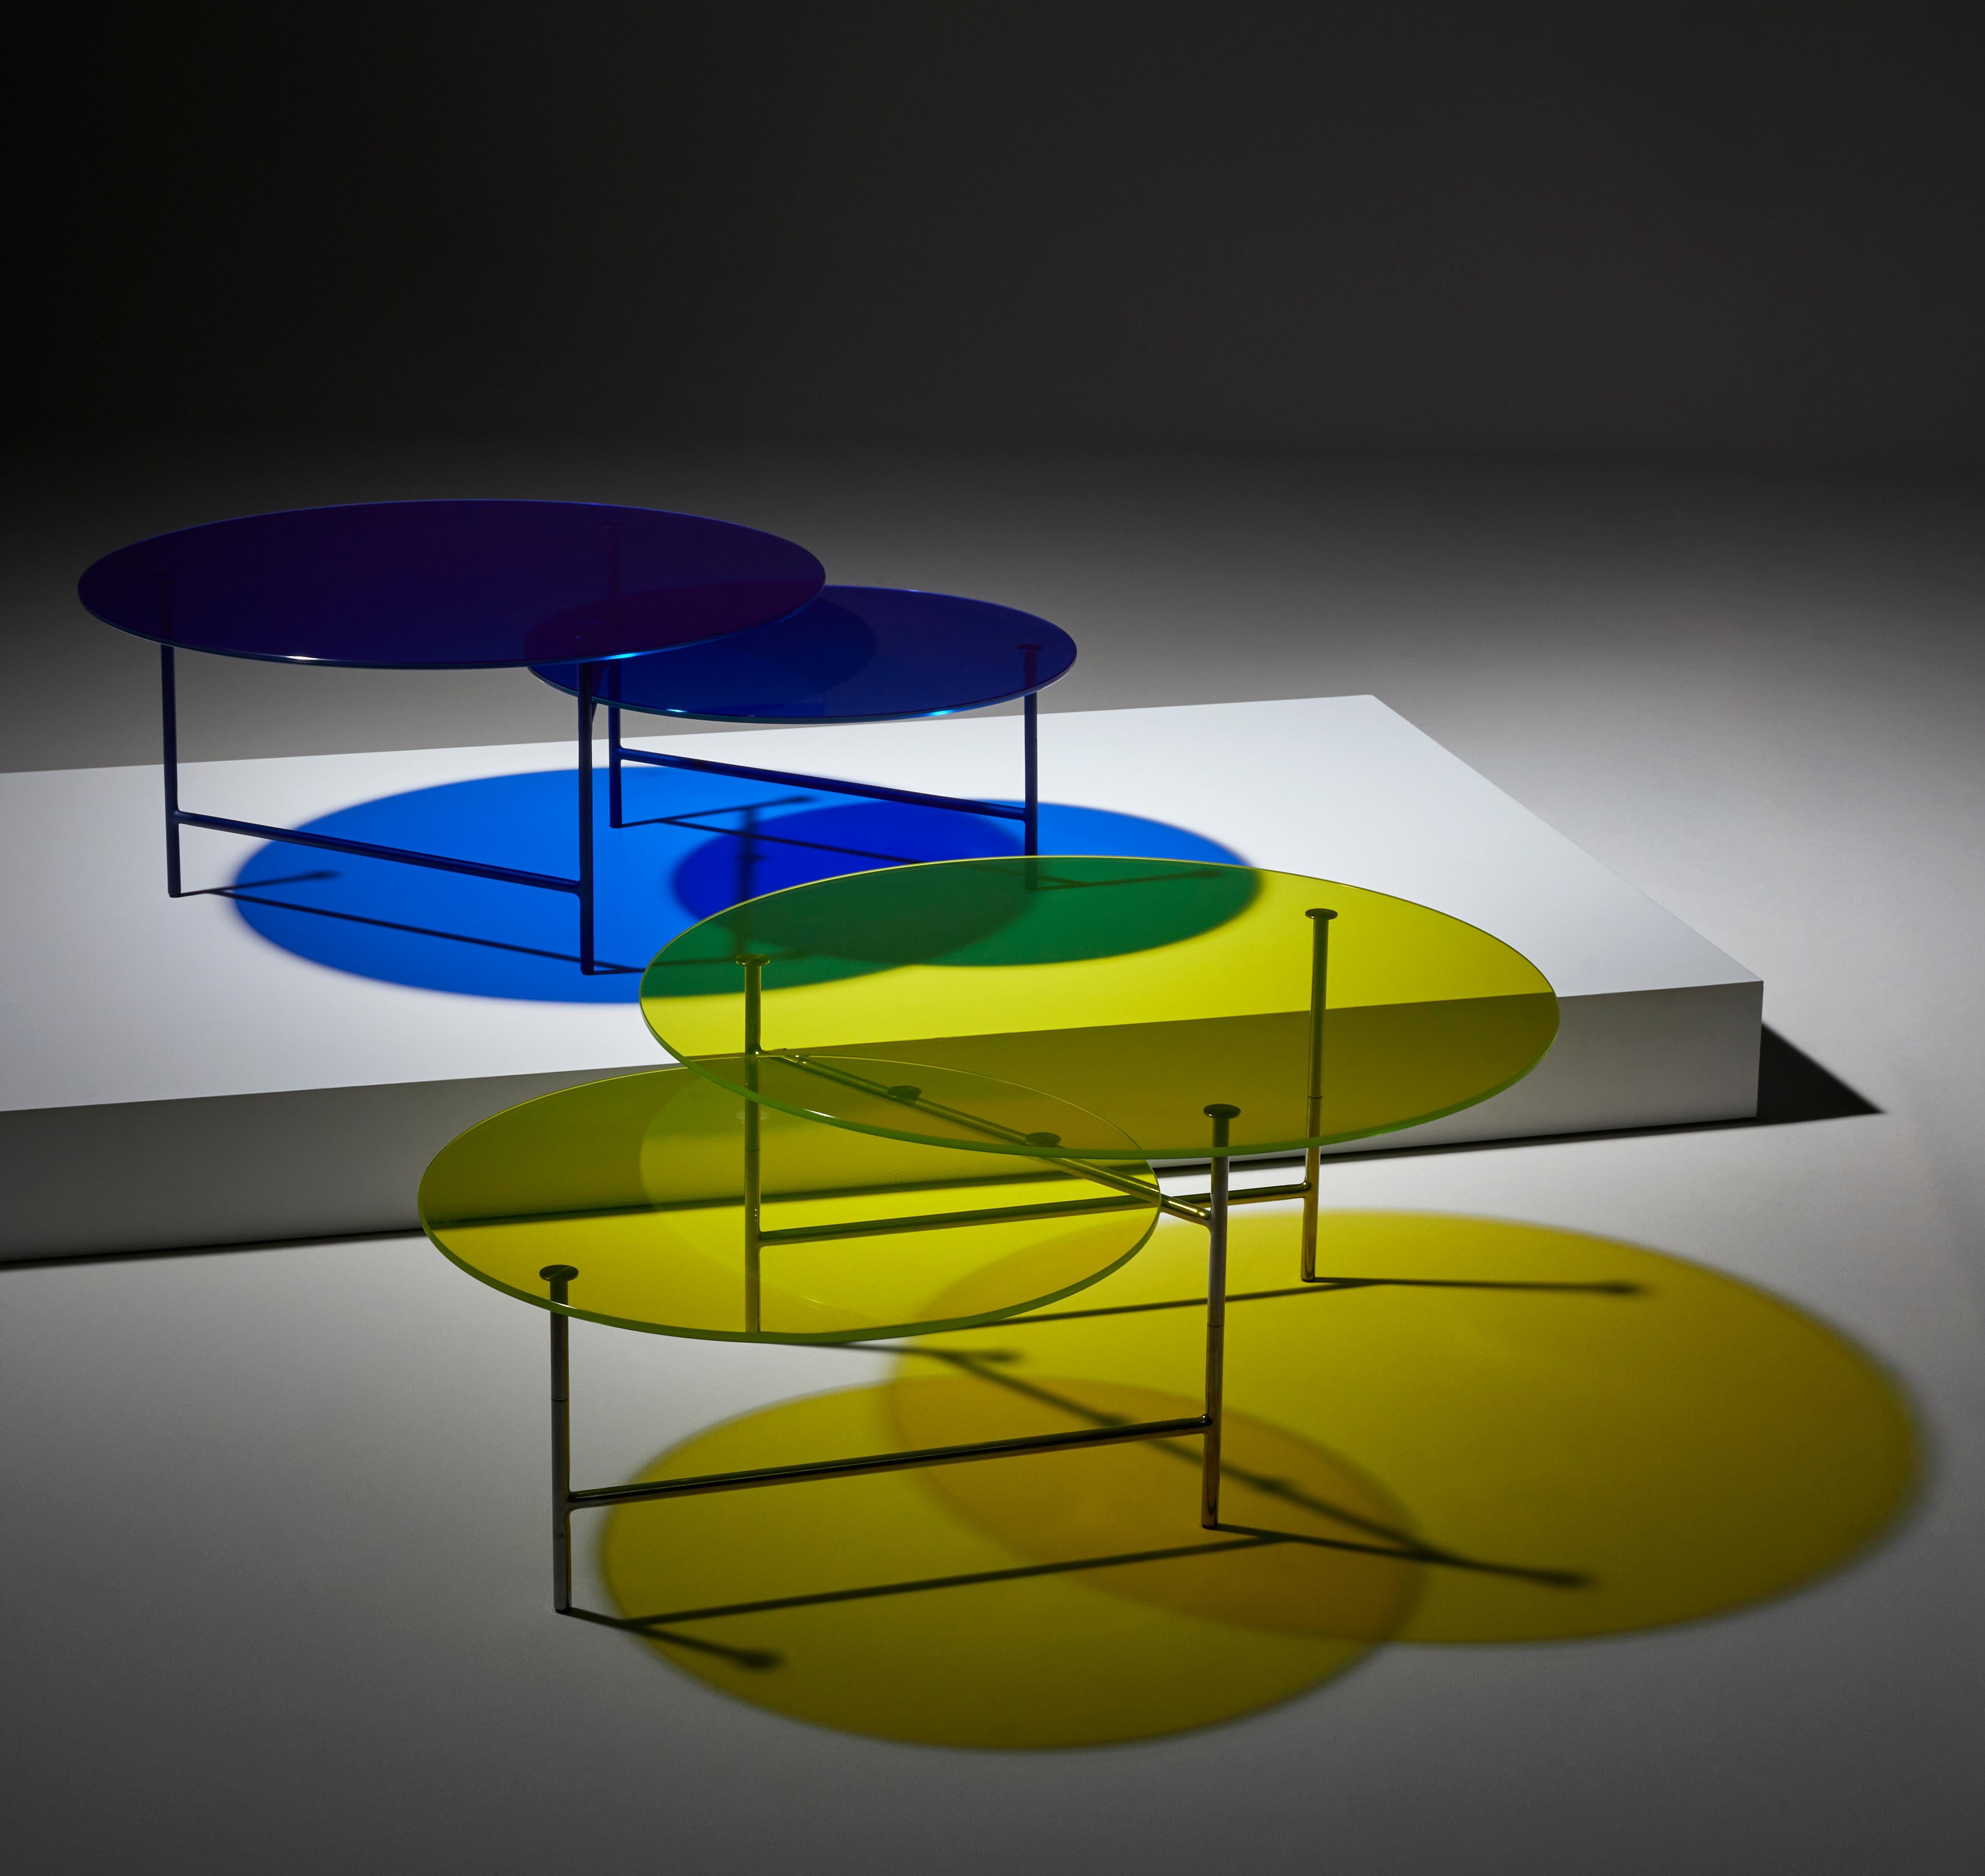 Zorro is a Minimalist yet graphical coffee table. The masked hero signature inspired the ingenious Z structure which supports a duo of overlapping round tabletops giving a sense of lightness to this simple and elegant
piece.
The design plays with